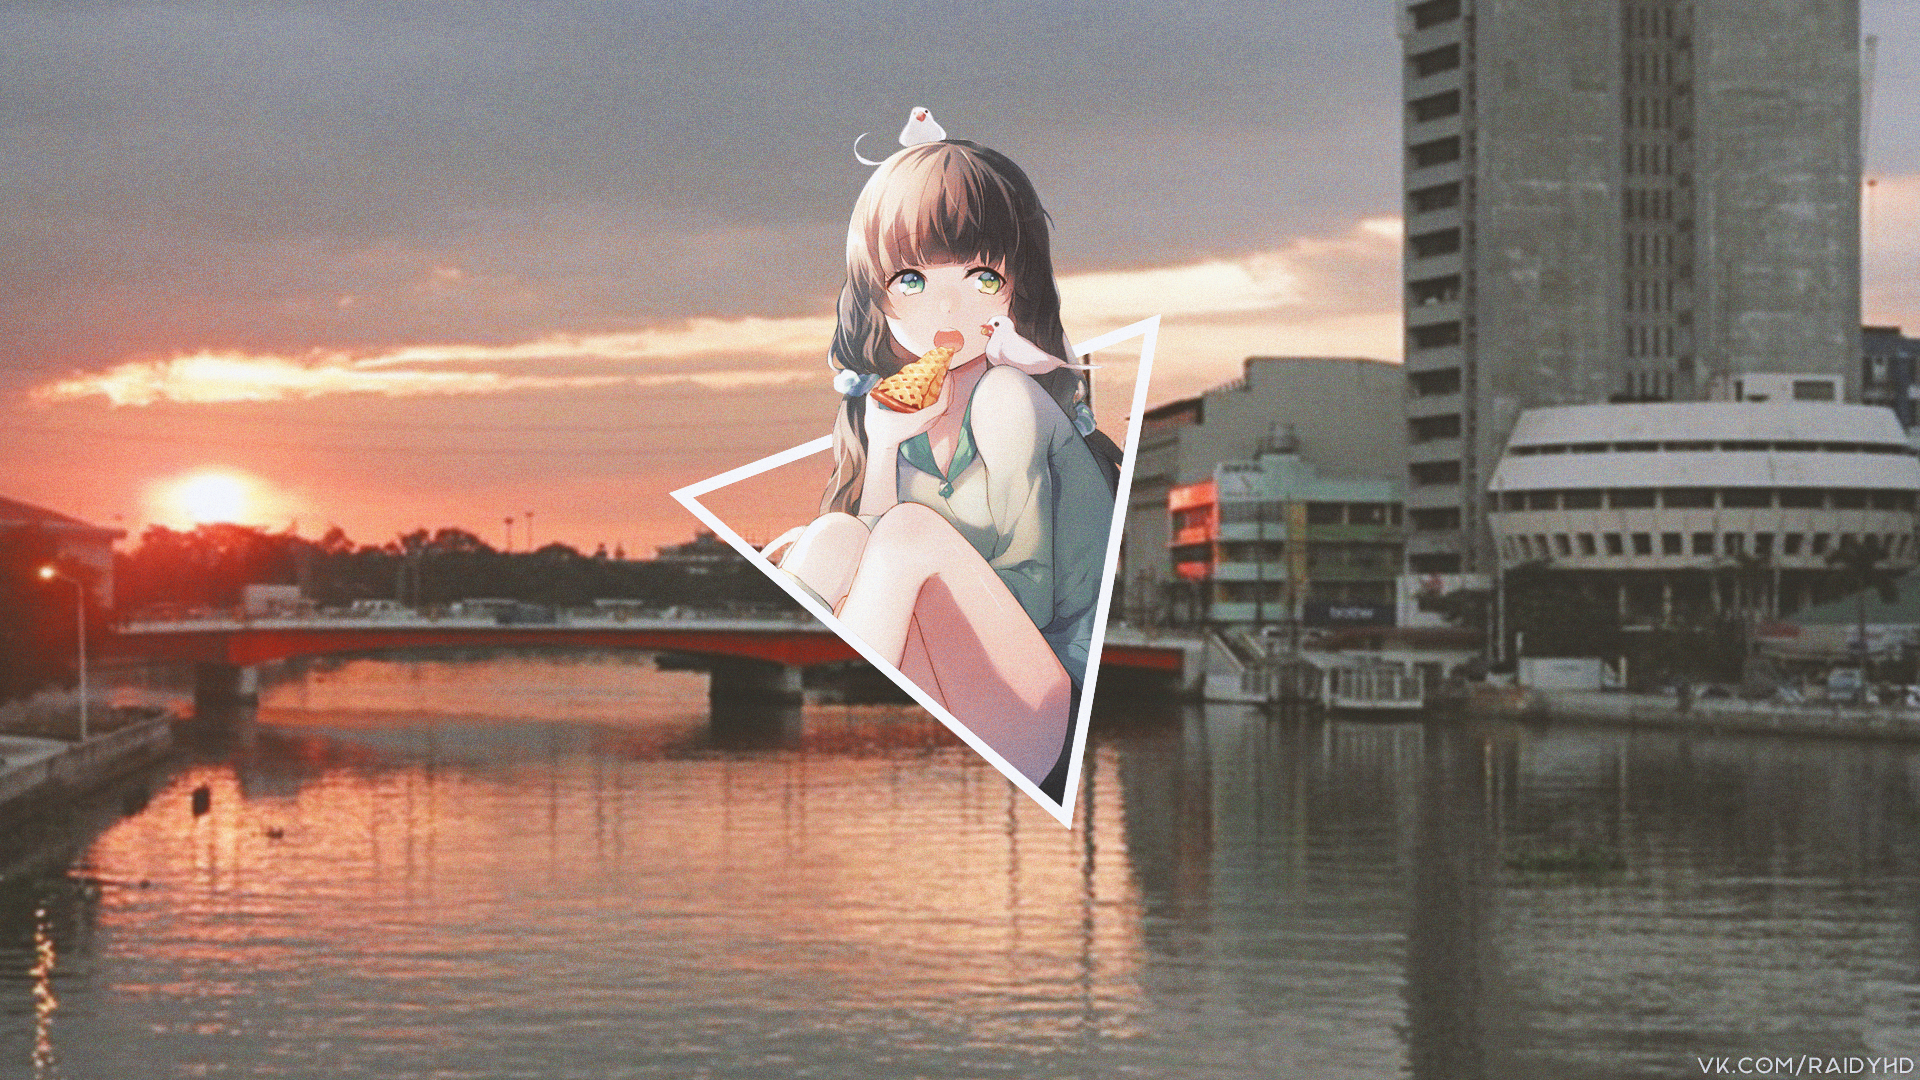 Anime 1920x1080 anime anime girls picture-in-picture sunset